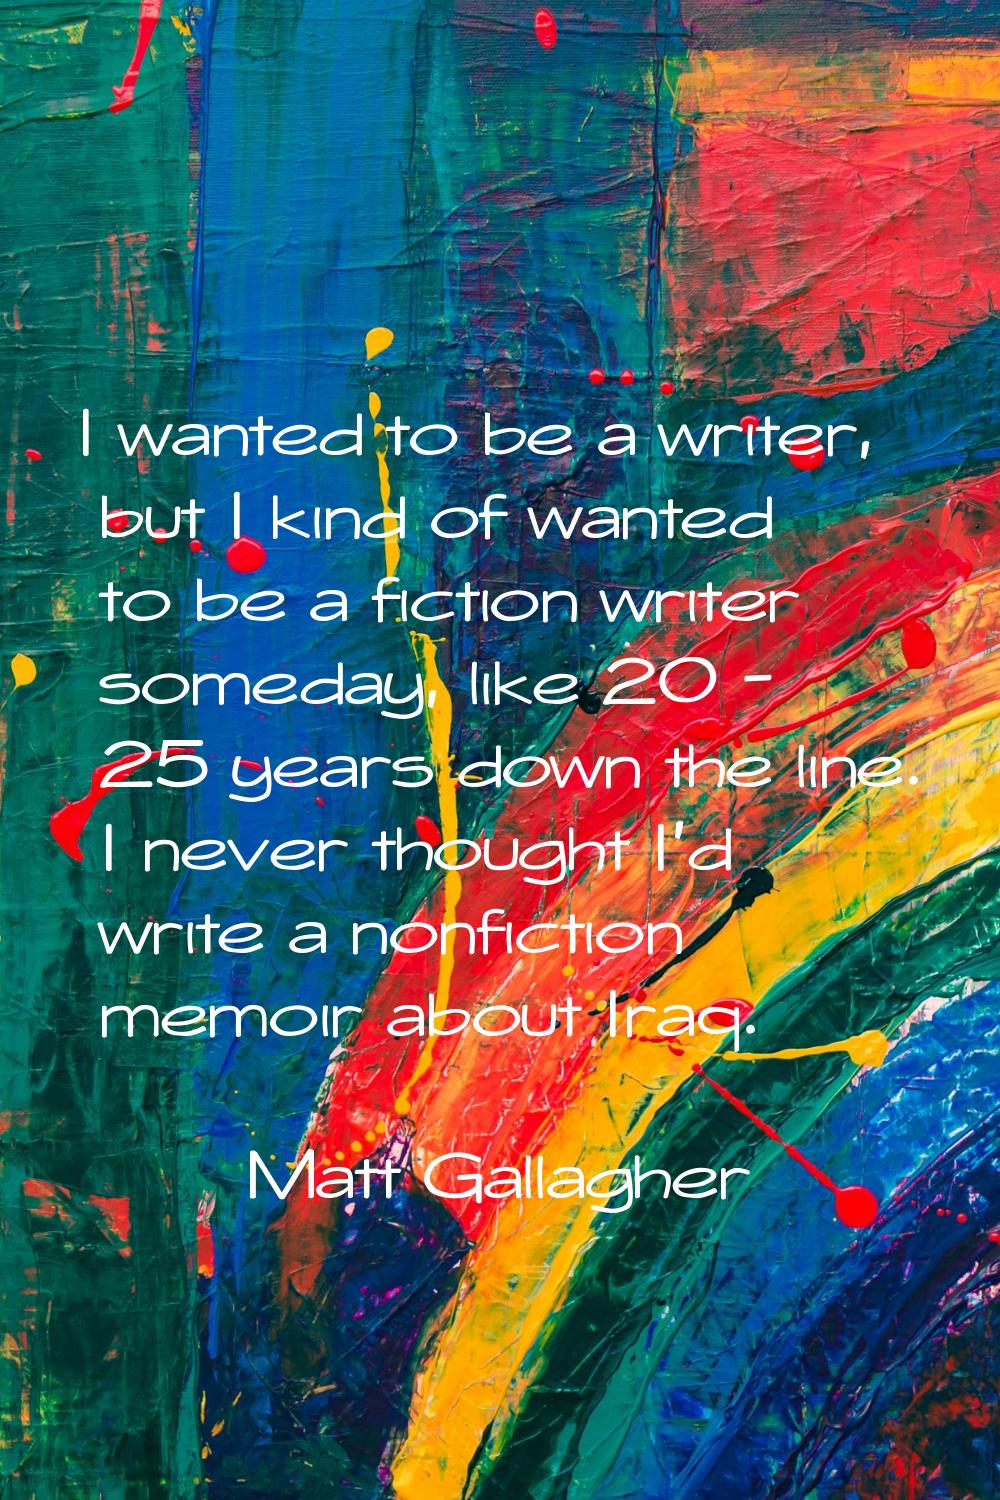 I wanted to be a writer, but I kind of wanted to be a fiction writer someday, like 20 - 25 years do